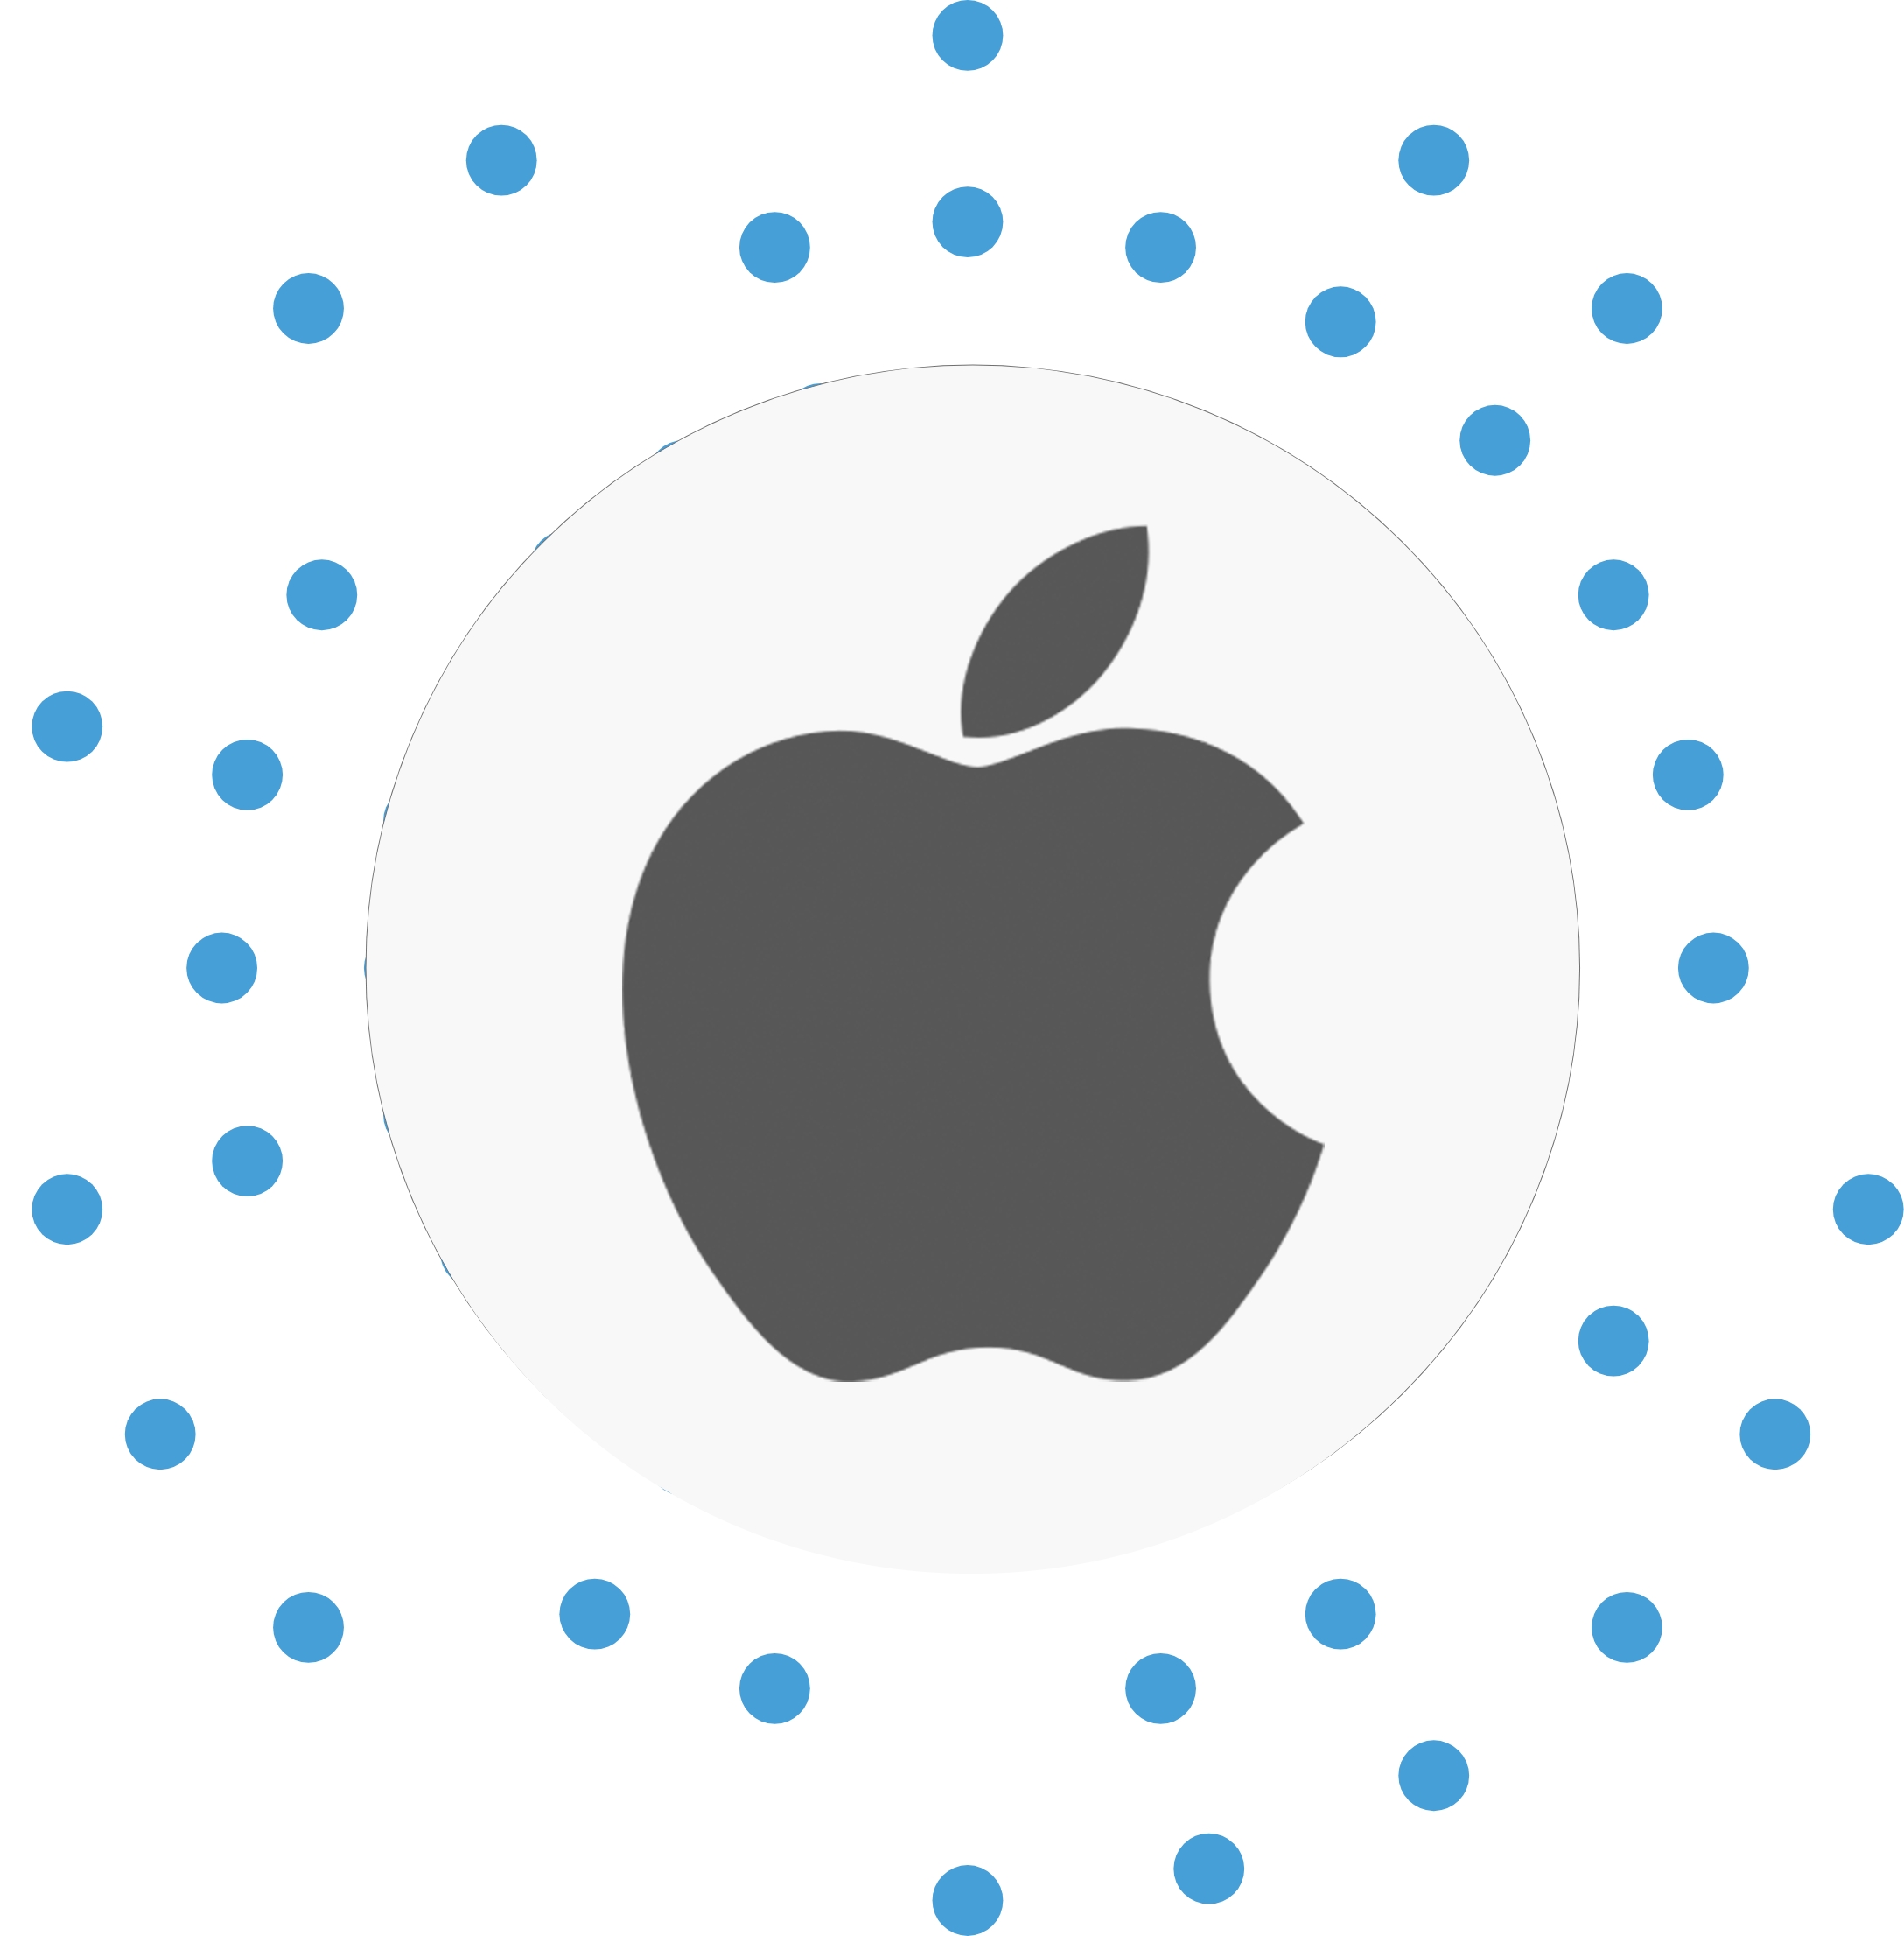 iOS Training Course Online Icon